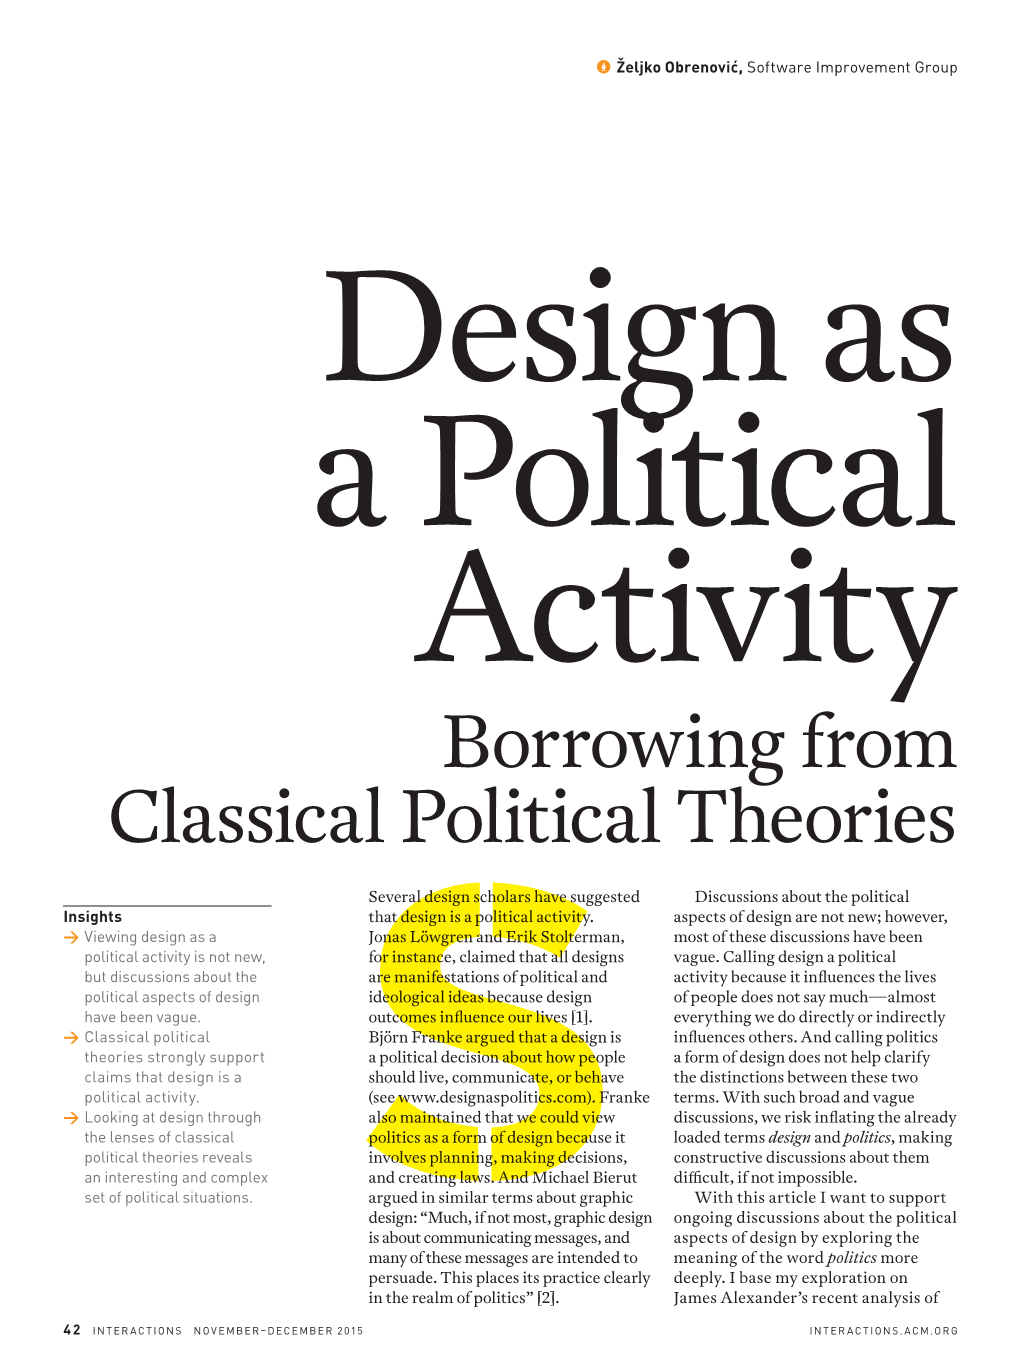 Design As a Political Activity: Borrowing from Classical Political